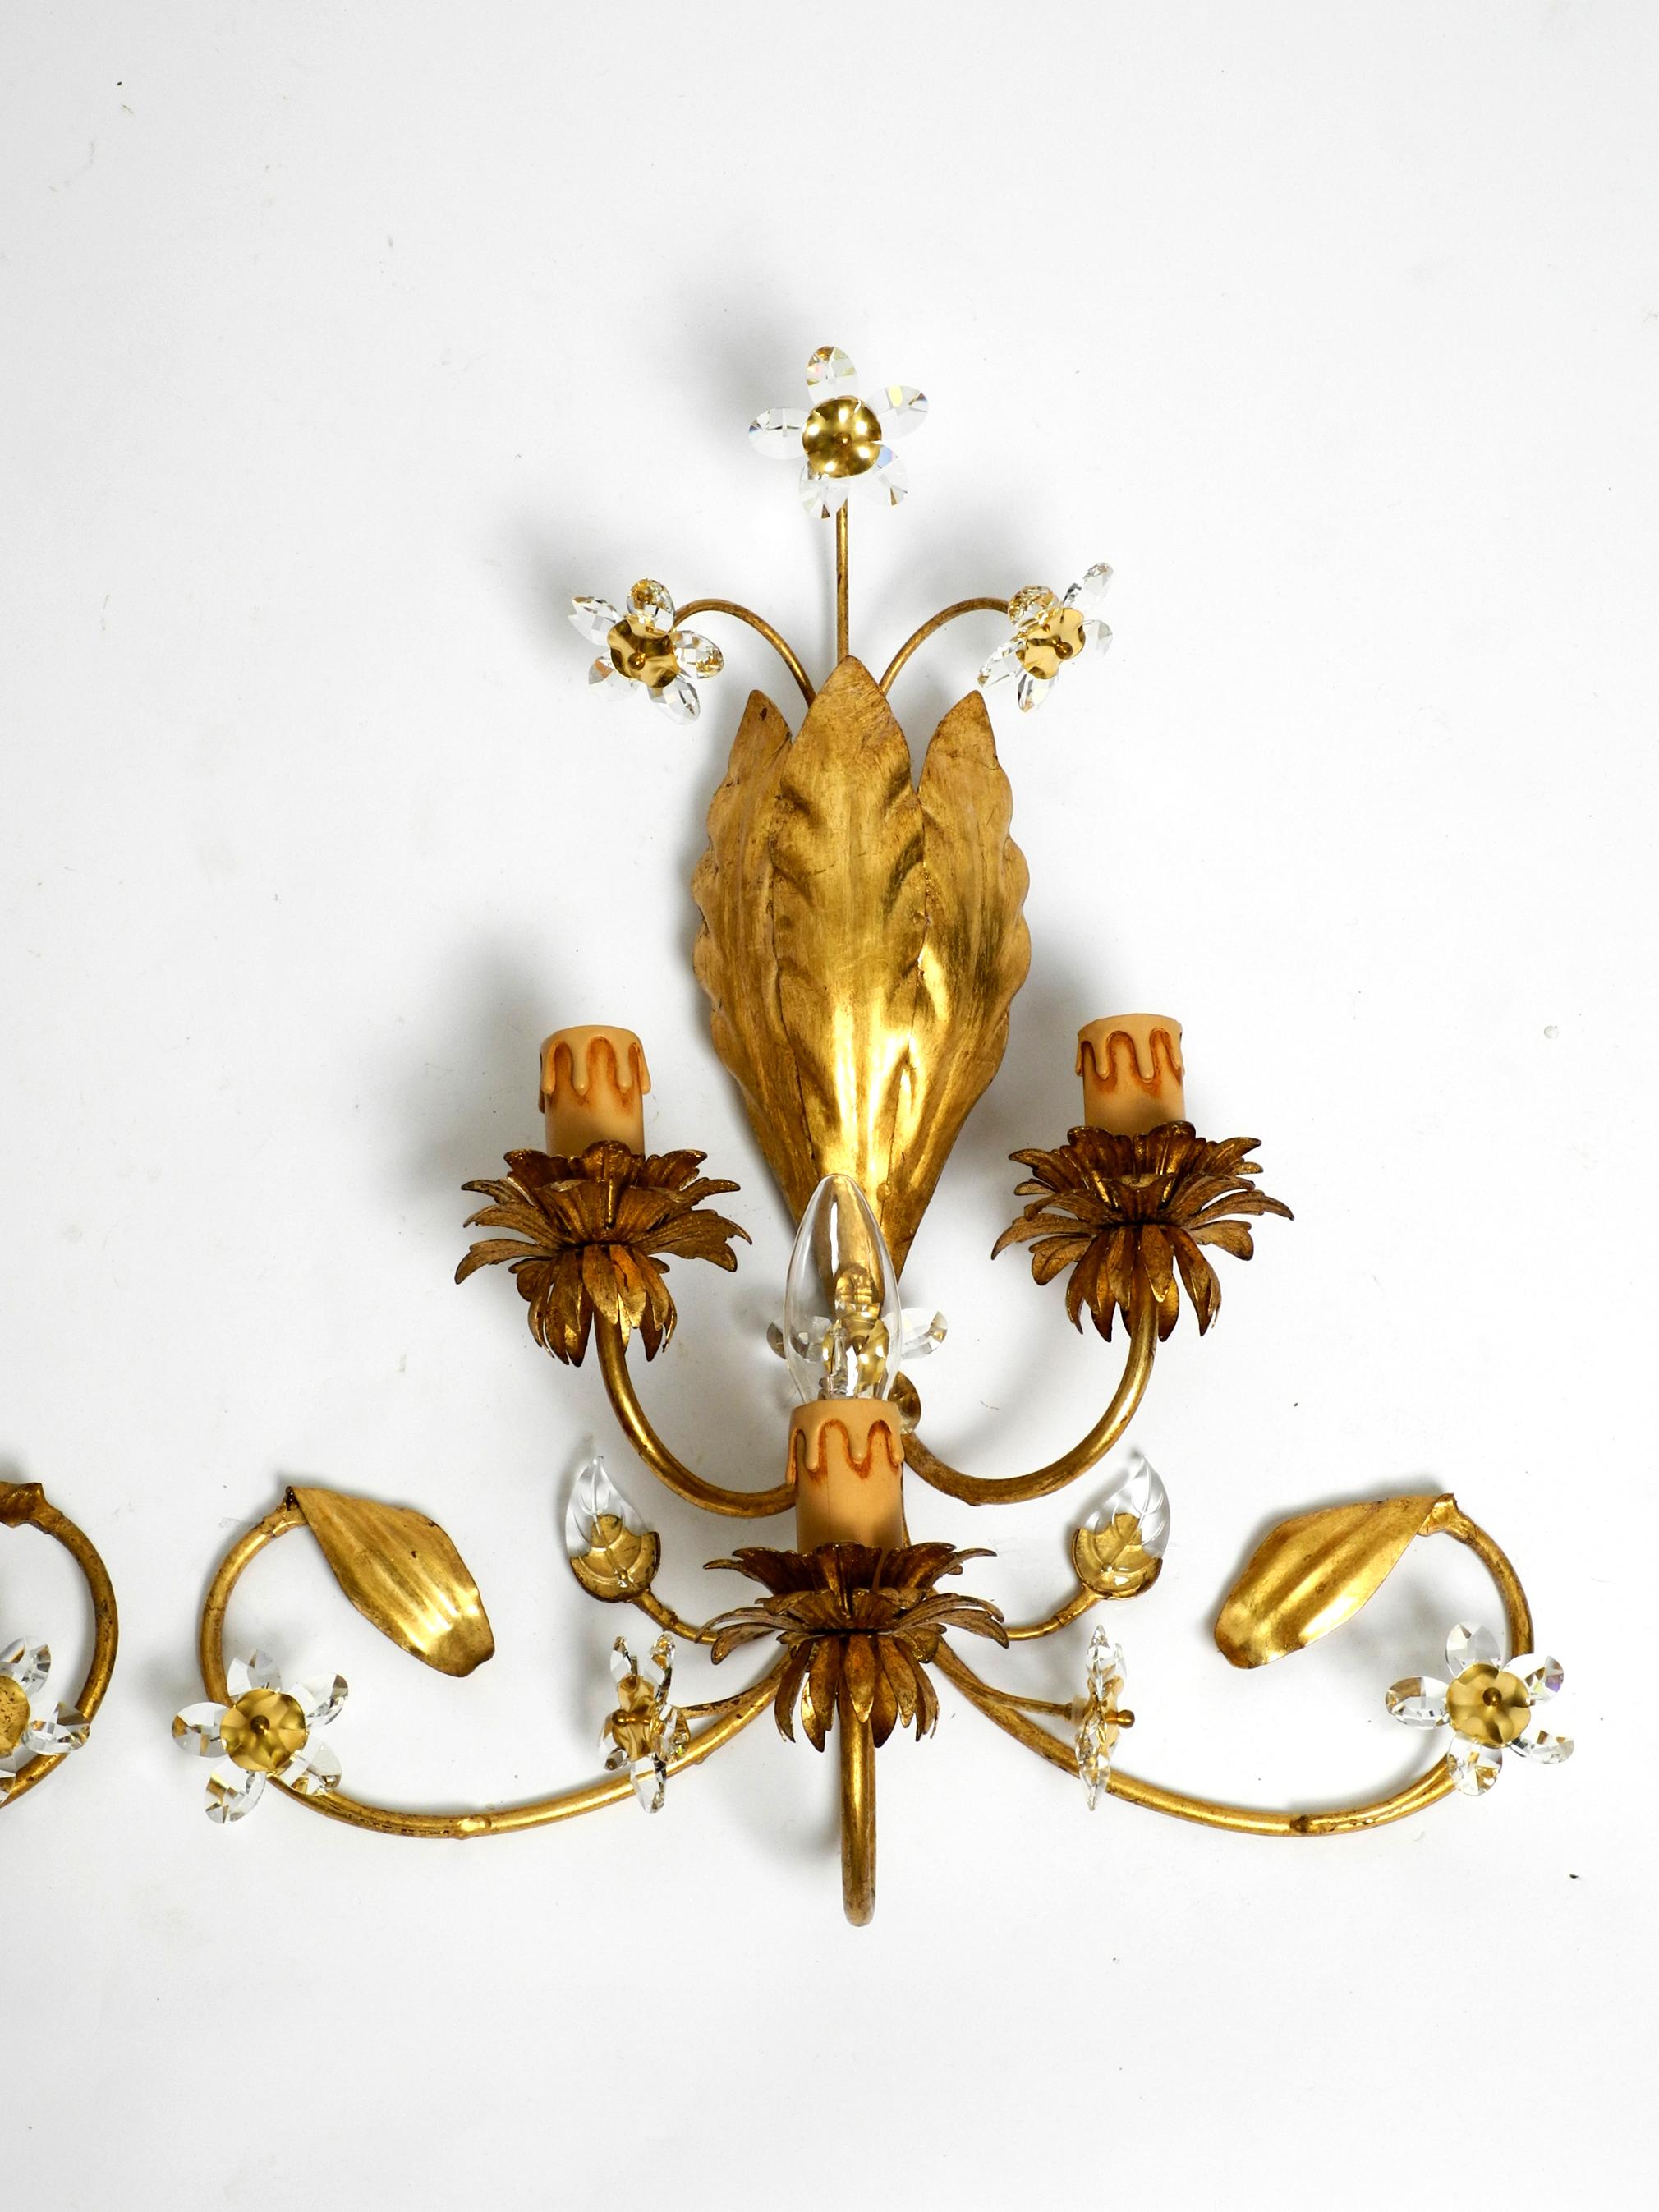 Pair of elegant Italian 1980s floral Hollywood Regency design wall lamps.
Stunning beautiful elaborate design with many details. Made in Italy.
The iron frame is completely gilded. With small glass stones, assembled in the shape of flowers. Very